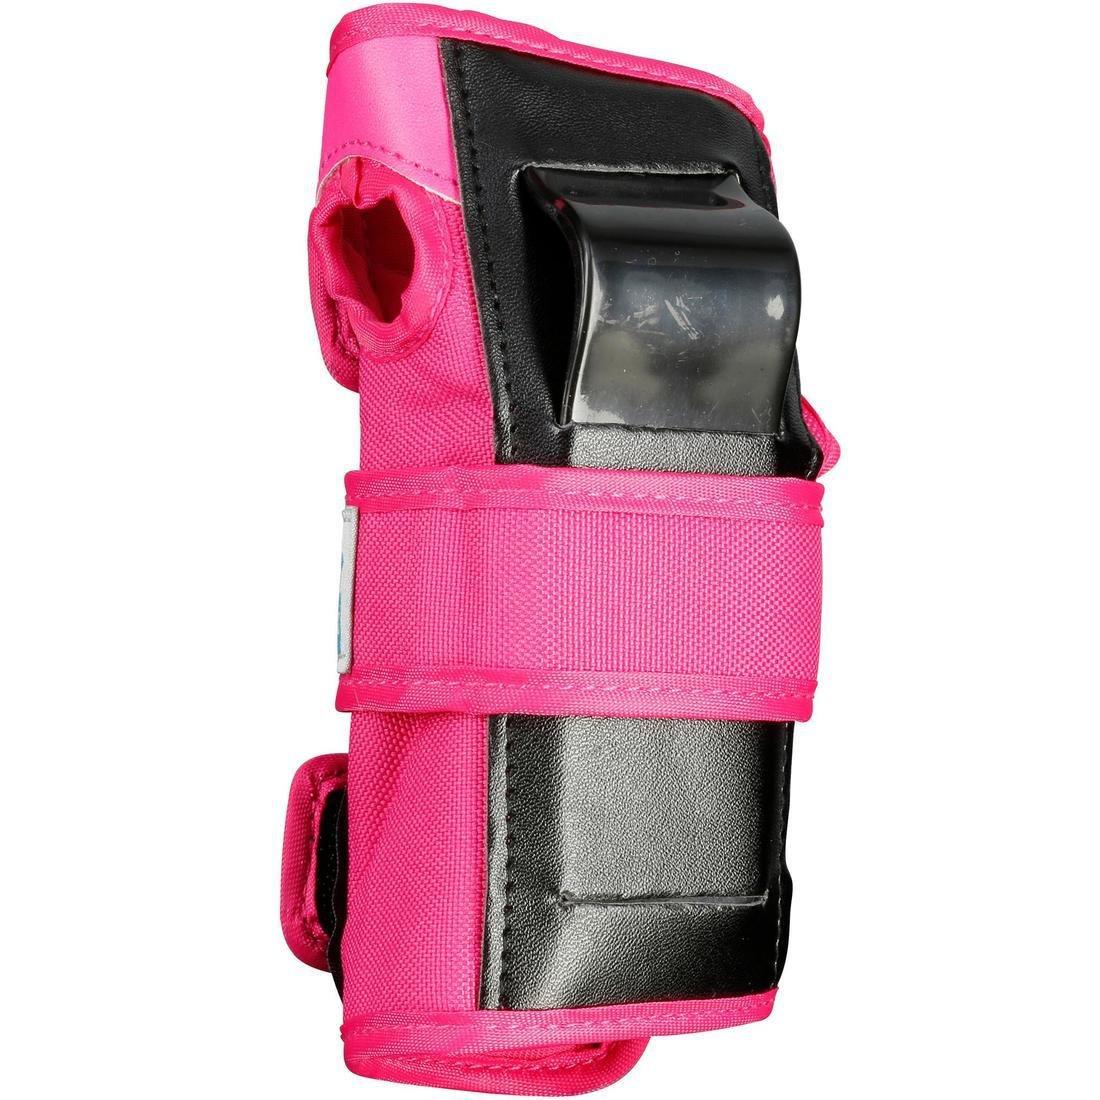 OXELO - Unisex Kids 2 X 3-Piece Skating Skateboard Scooter Protective Gear Basic, Pink